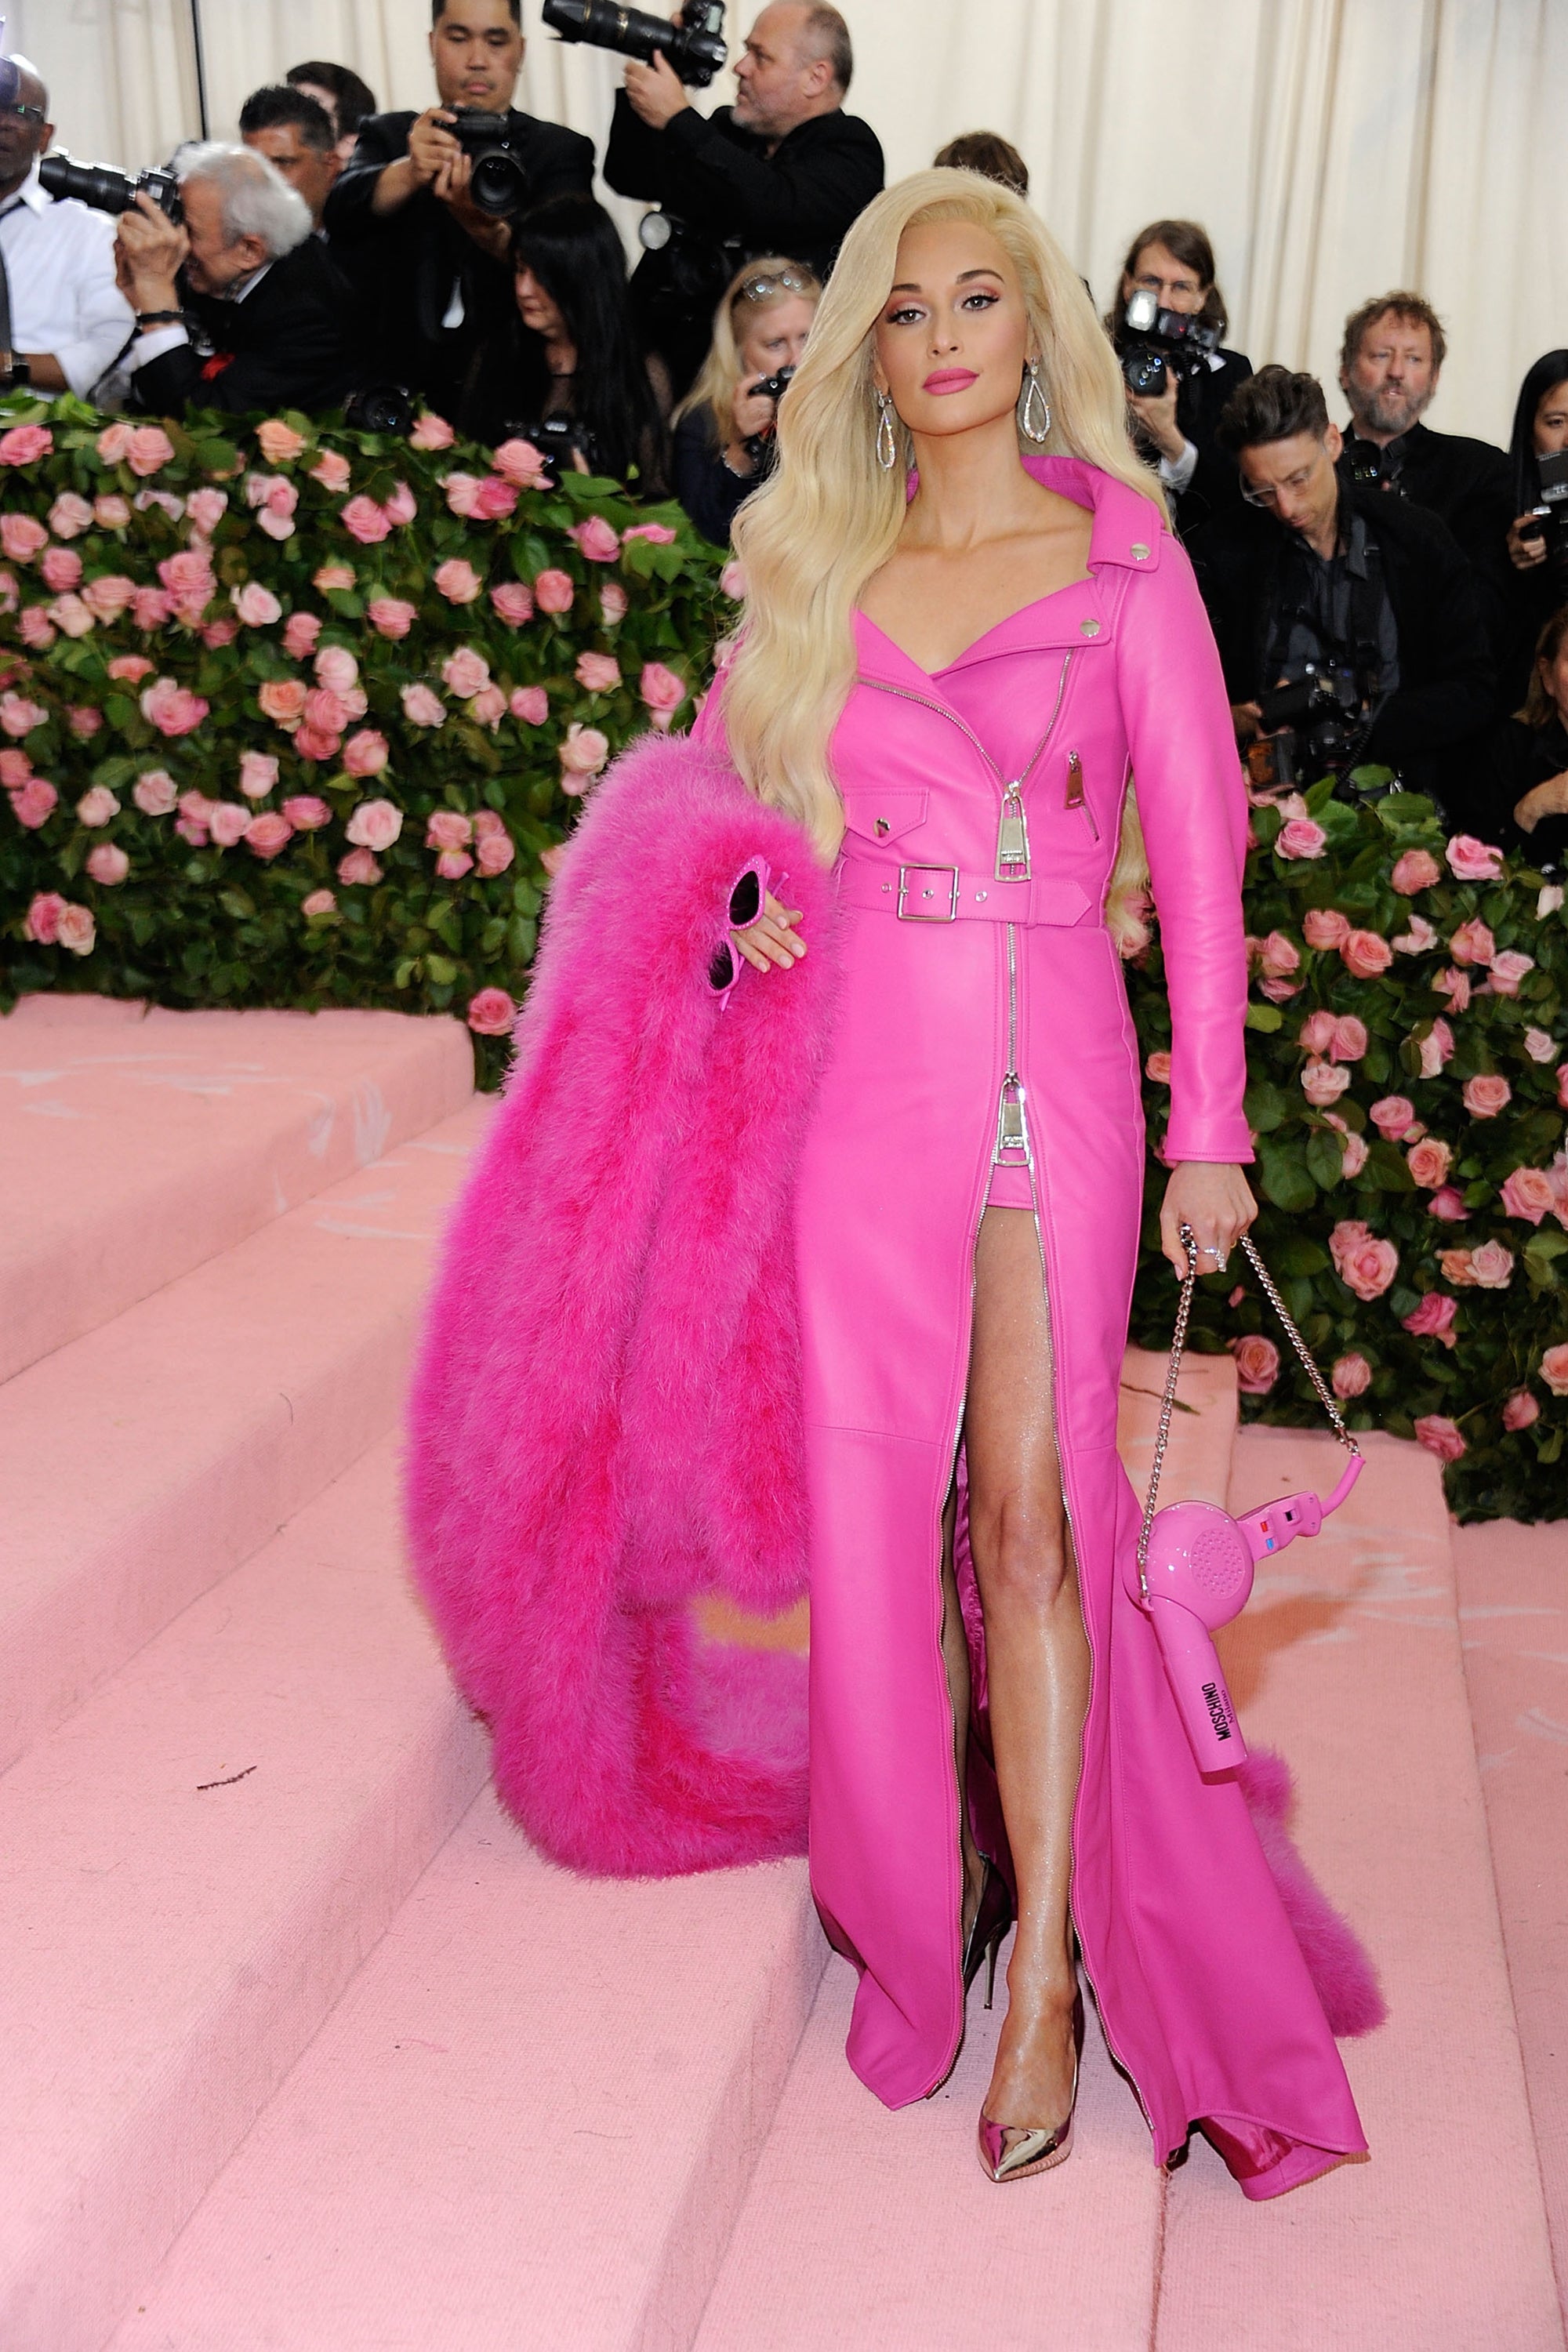 Hot Pink Is The Color Of 2022: Symbolism Behind Trend